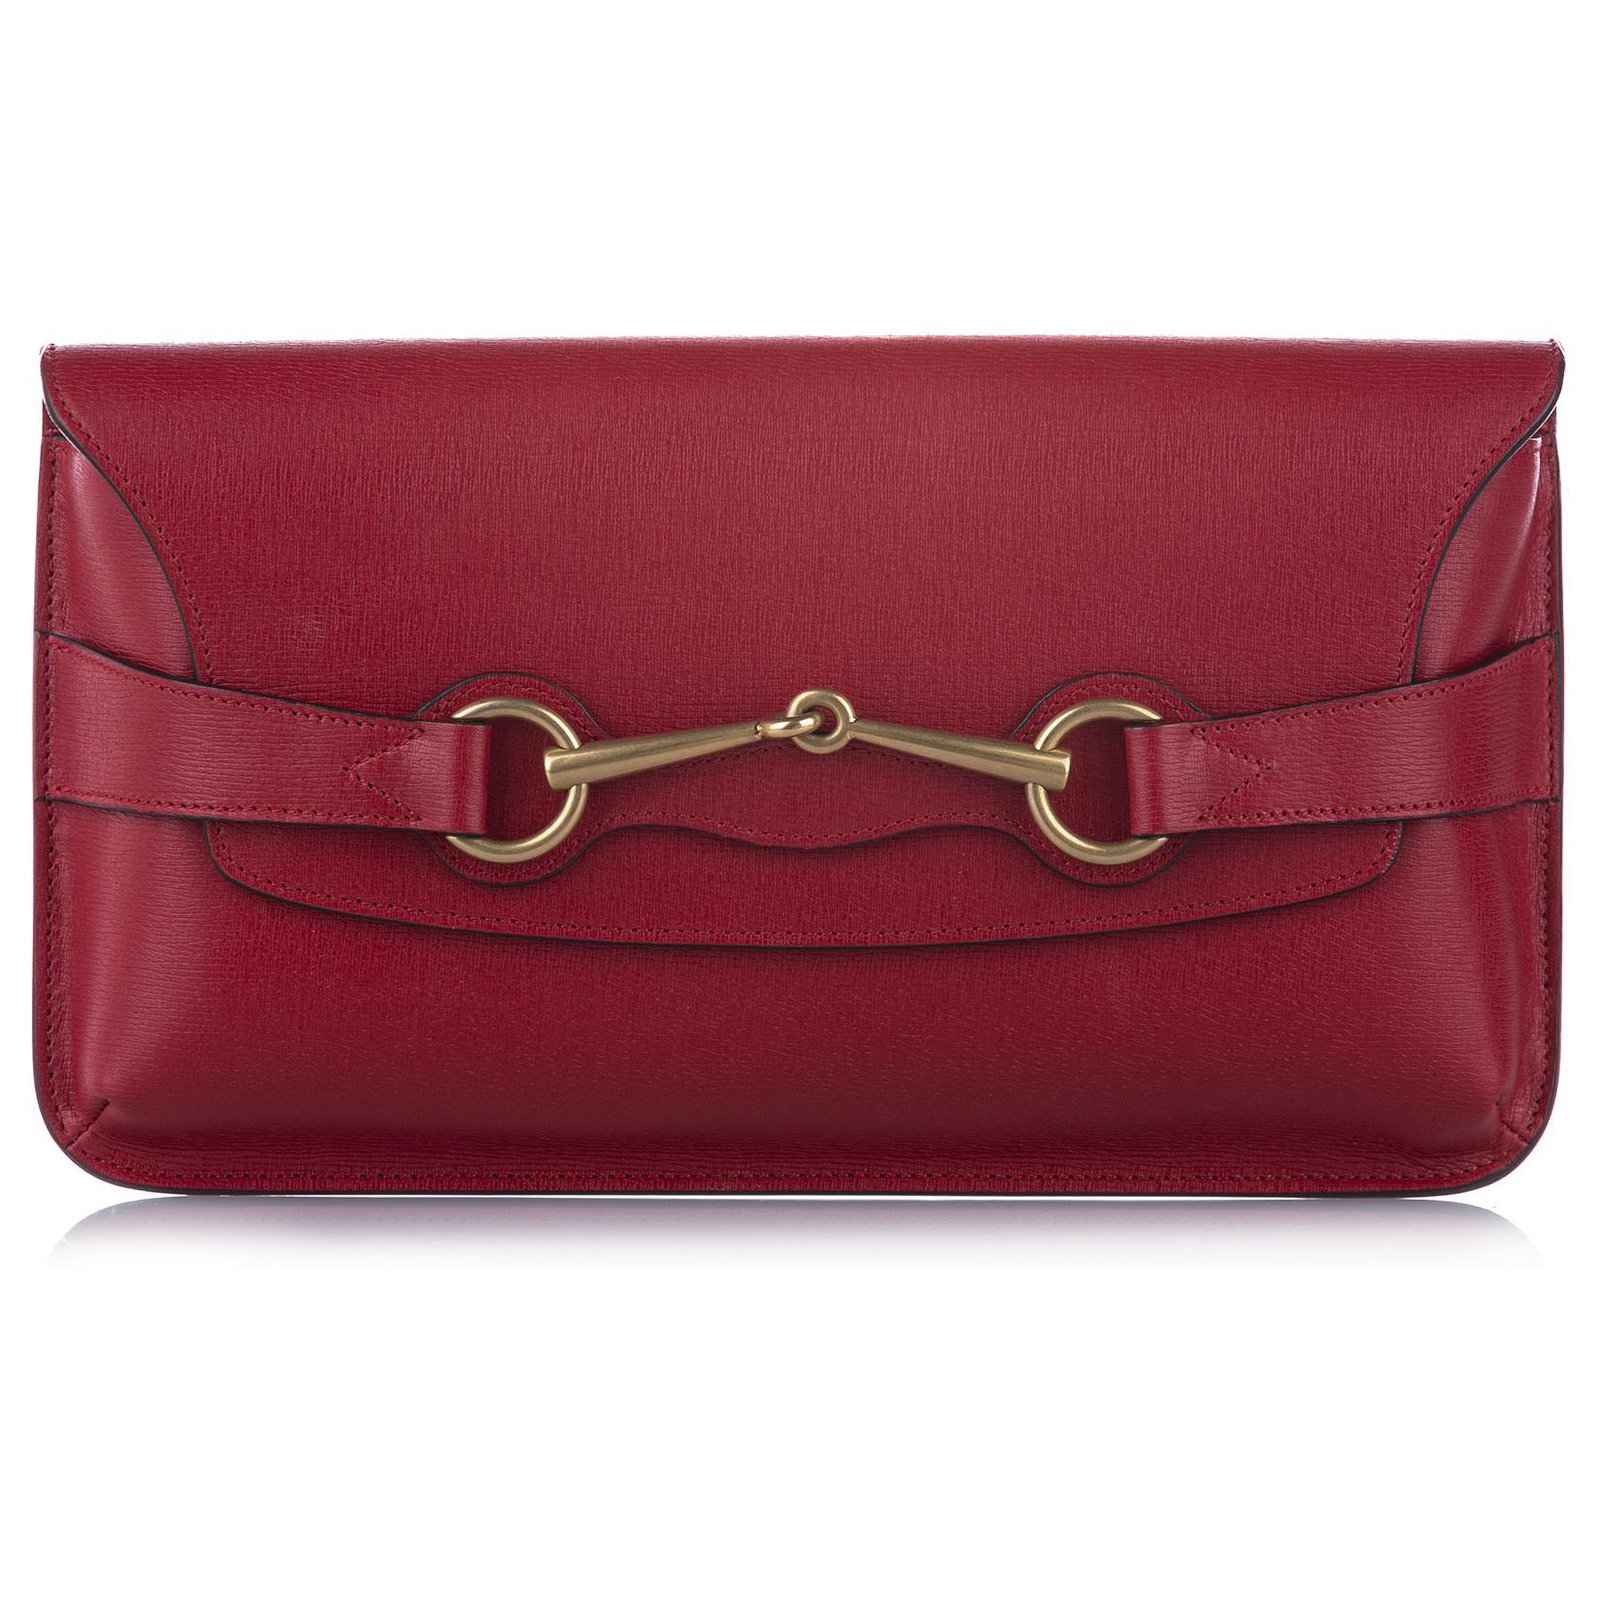 Gucci Red Bright Bit Leather Clutch Bag Metal Pony-style calfskin ref ...